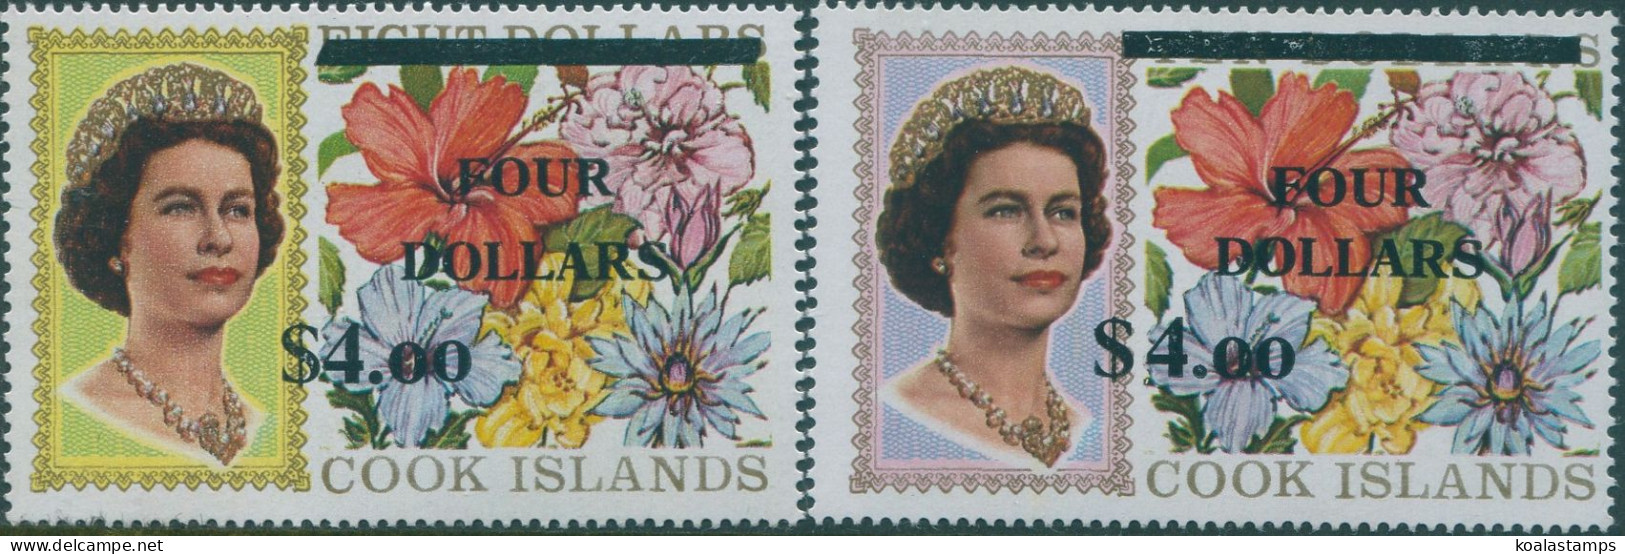 Cook Islands 1970 SG335-336 $4 Surcharges QEII Flowers Set MNH - Islas Cook